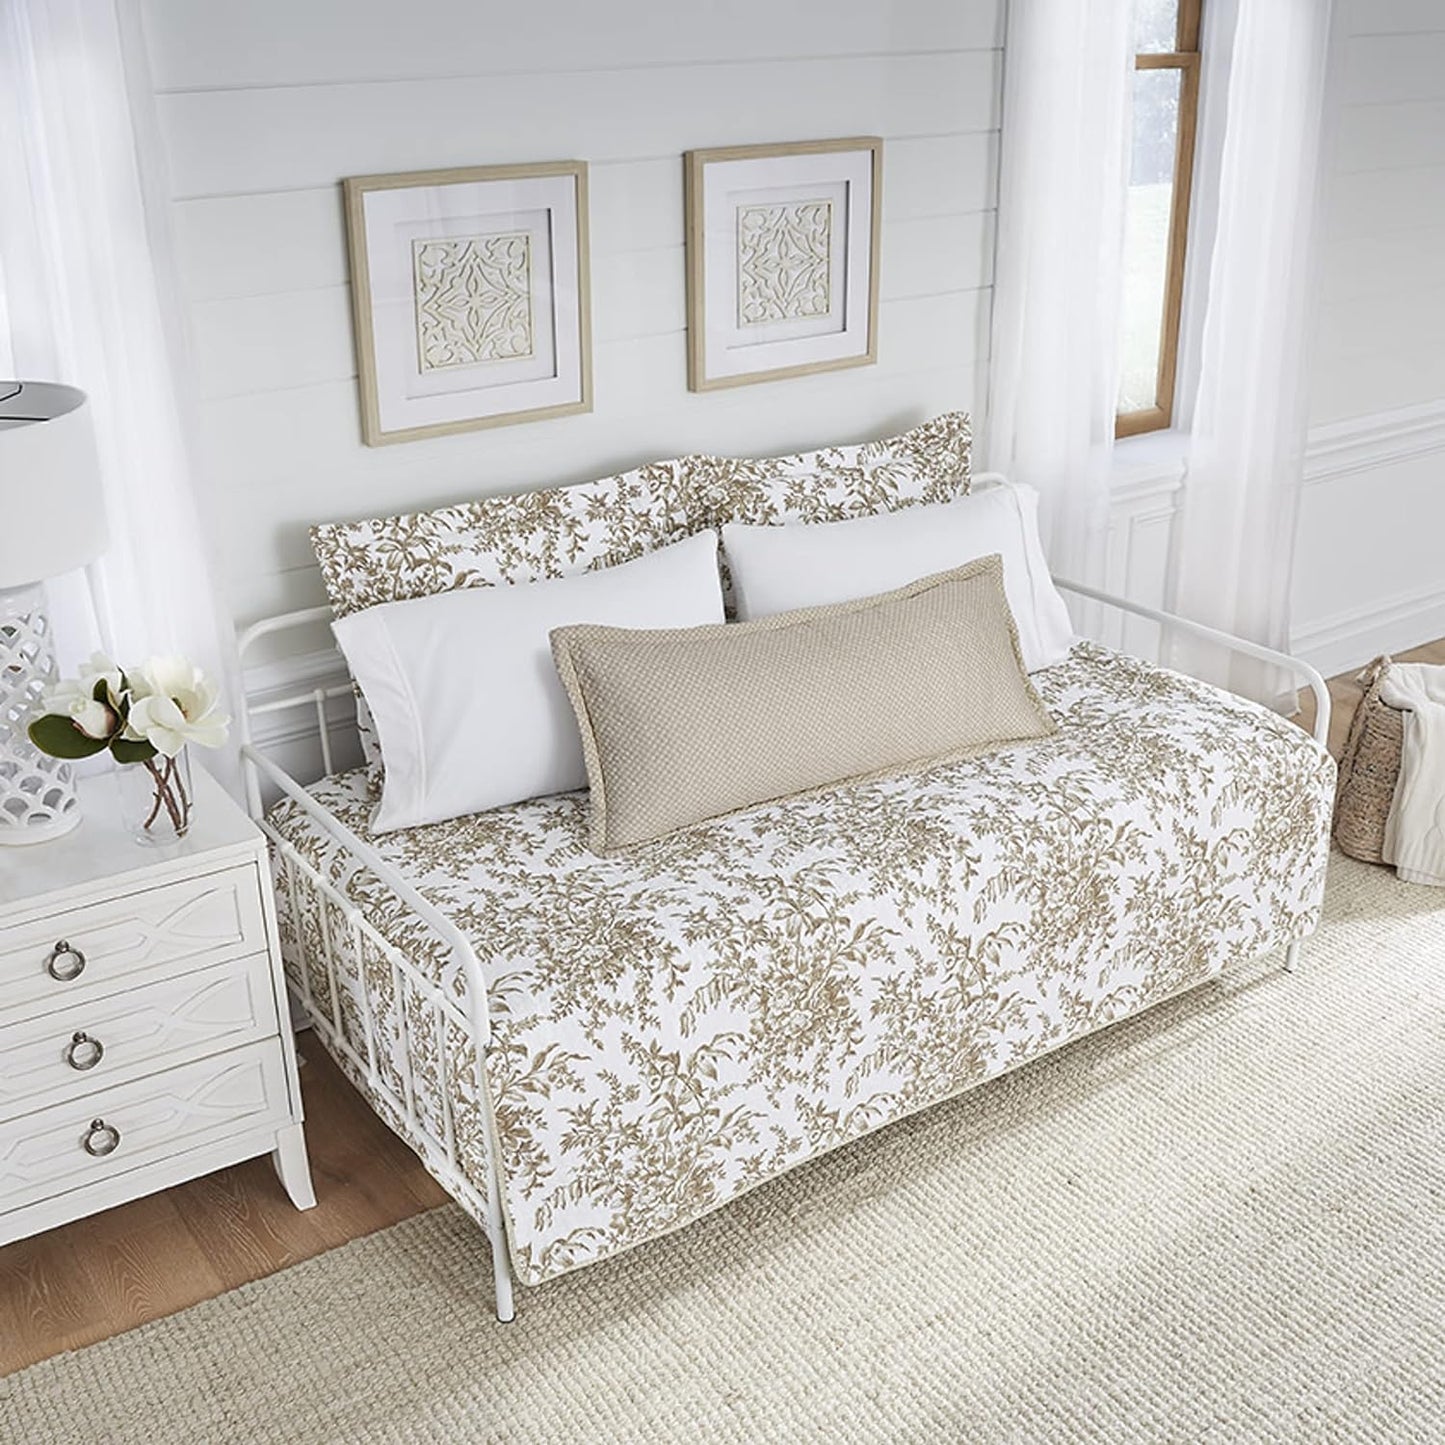 Laura Ashley Home | Bedford Collection | Quilt Set - 100% Cotton, Lightweight & Breathable, Reversible Bedding, Pre-Washed for Added Softness, Daybed, Mocha